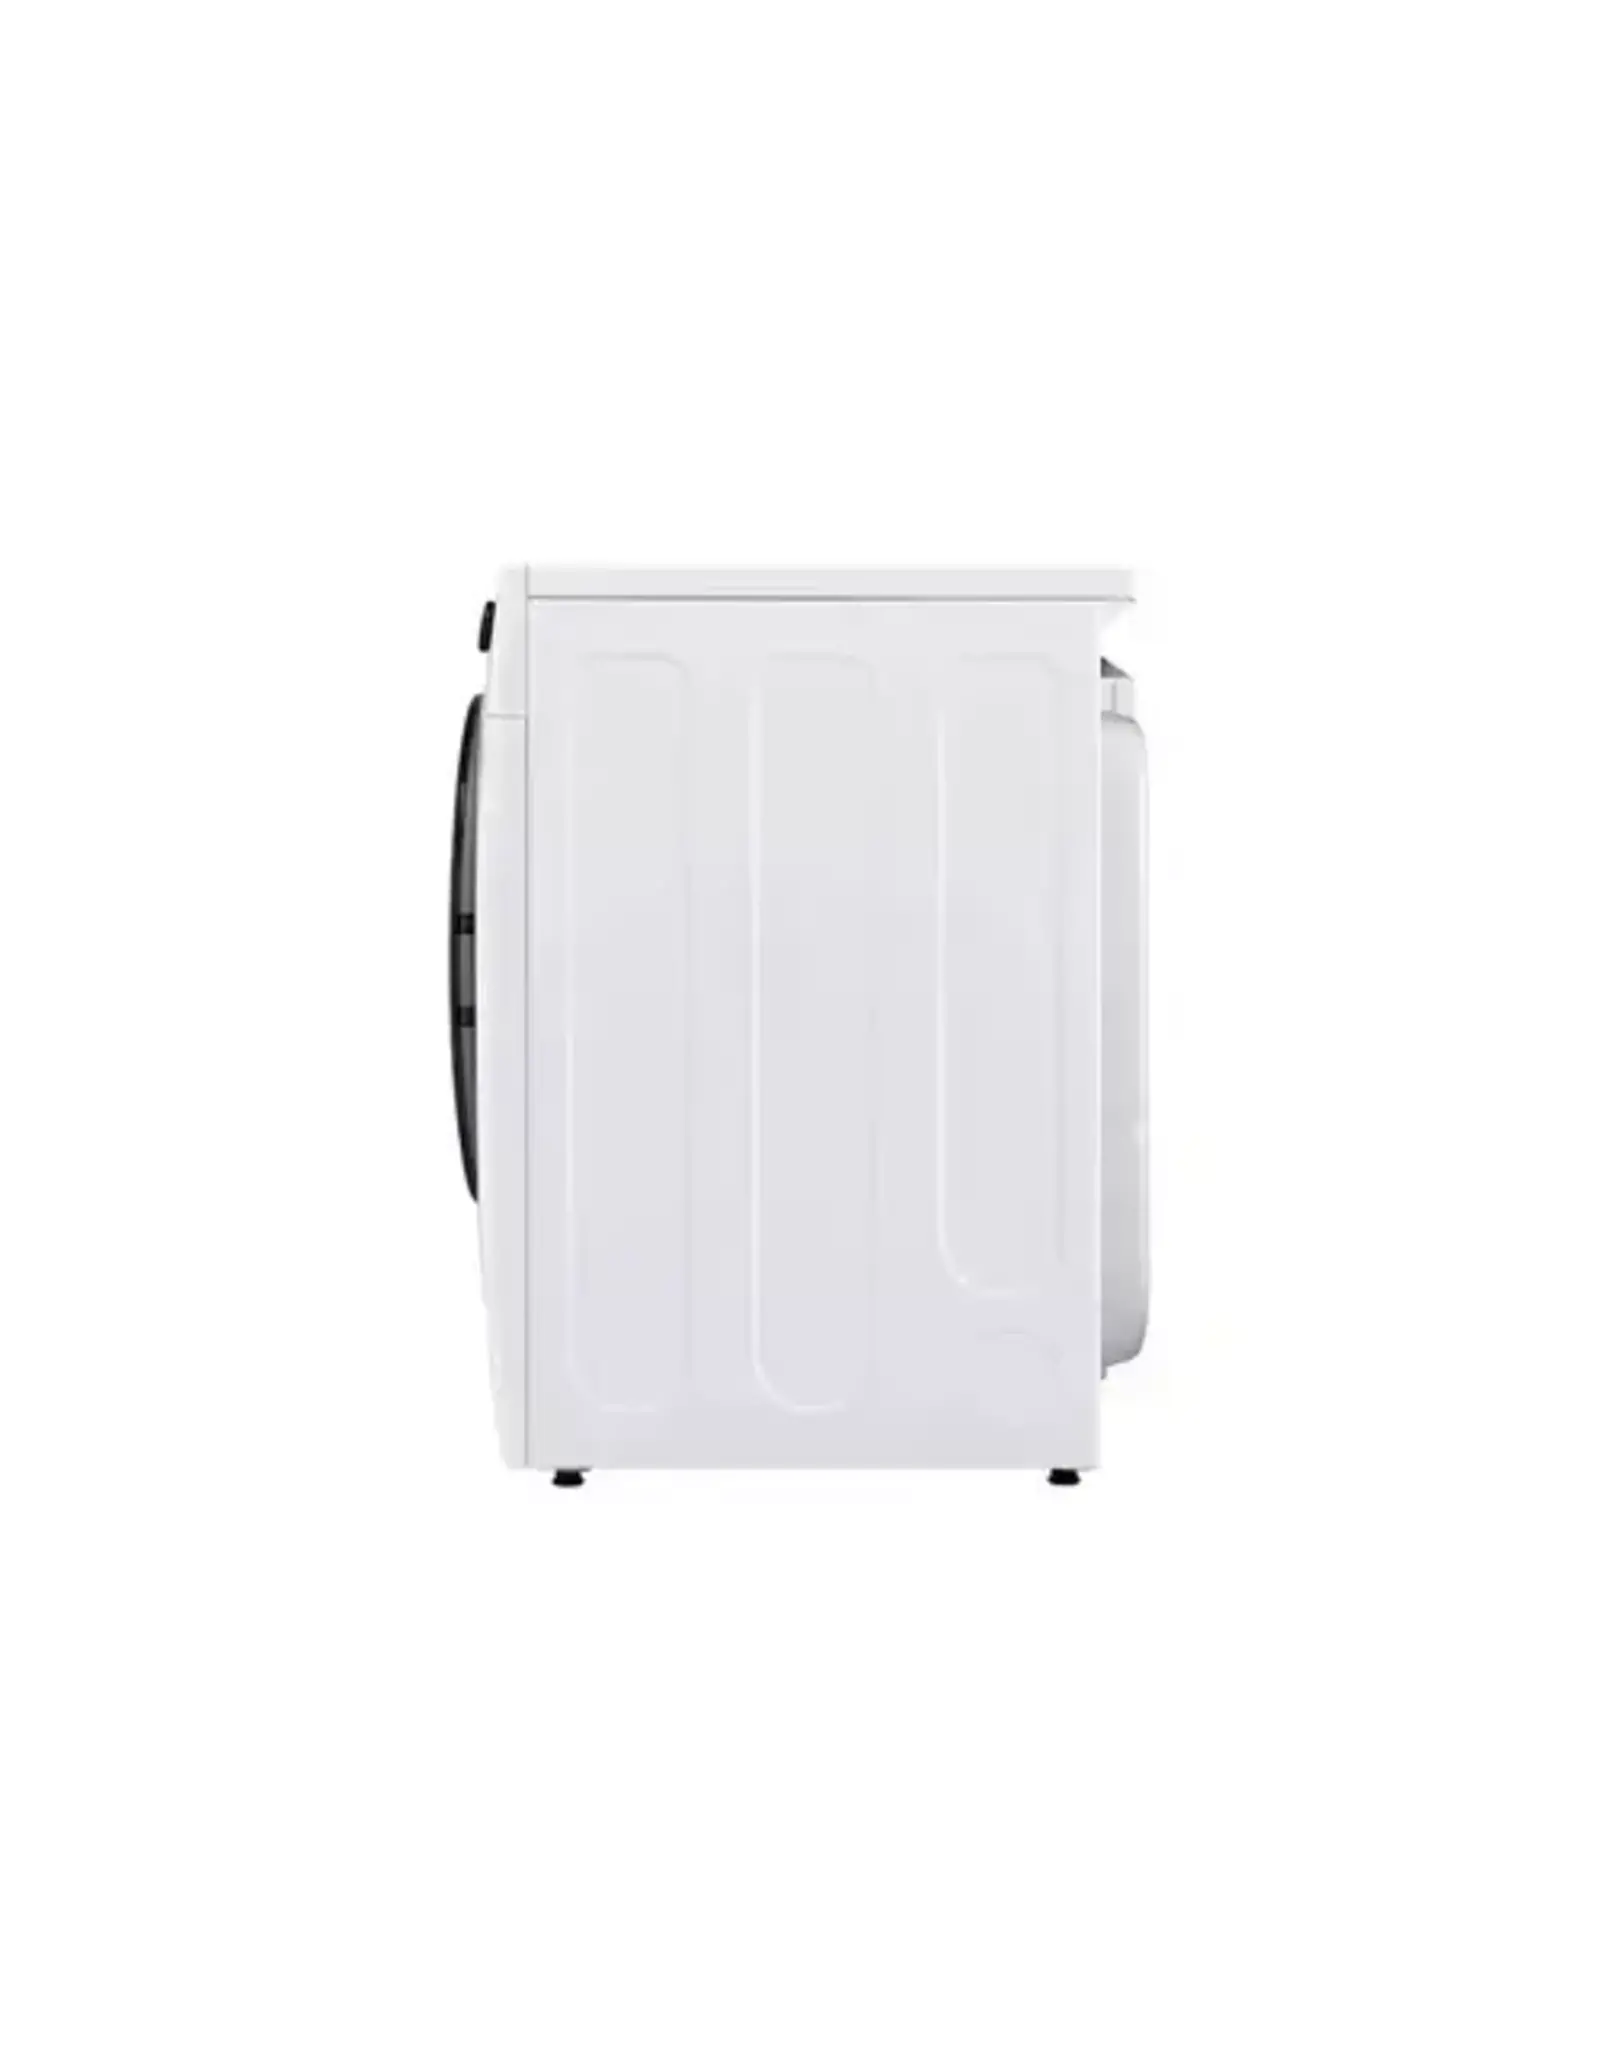 lg DLEX4080W 7.4 cu. ft. Ultra Large Capacity Smart Front Load Energy Star Electric Dryer with Sensor Dry & Steam Technology